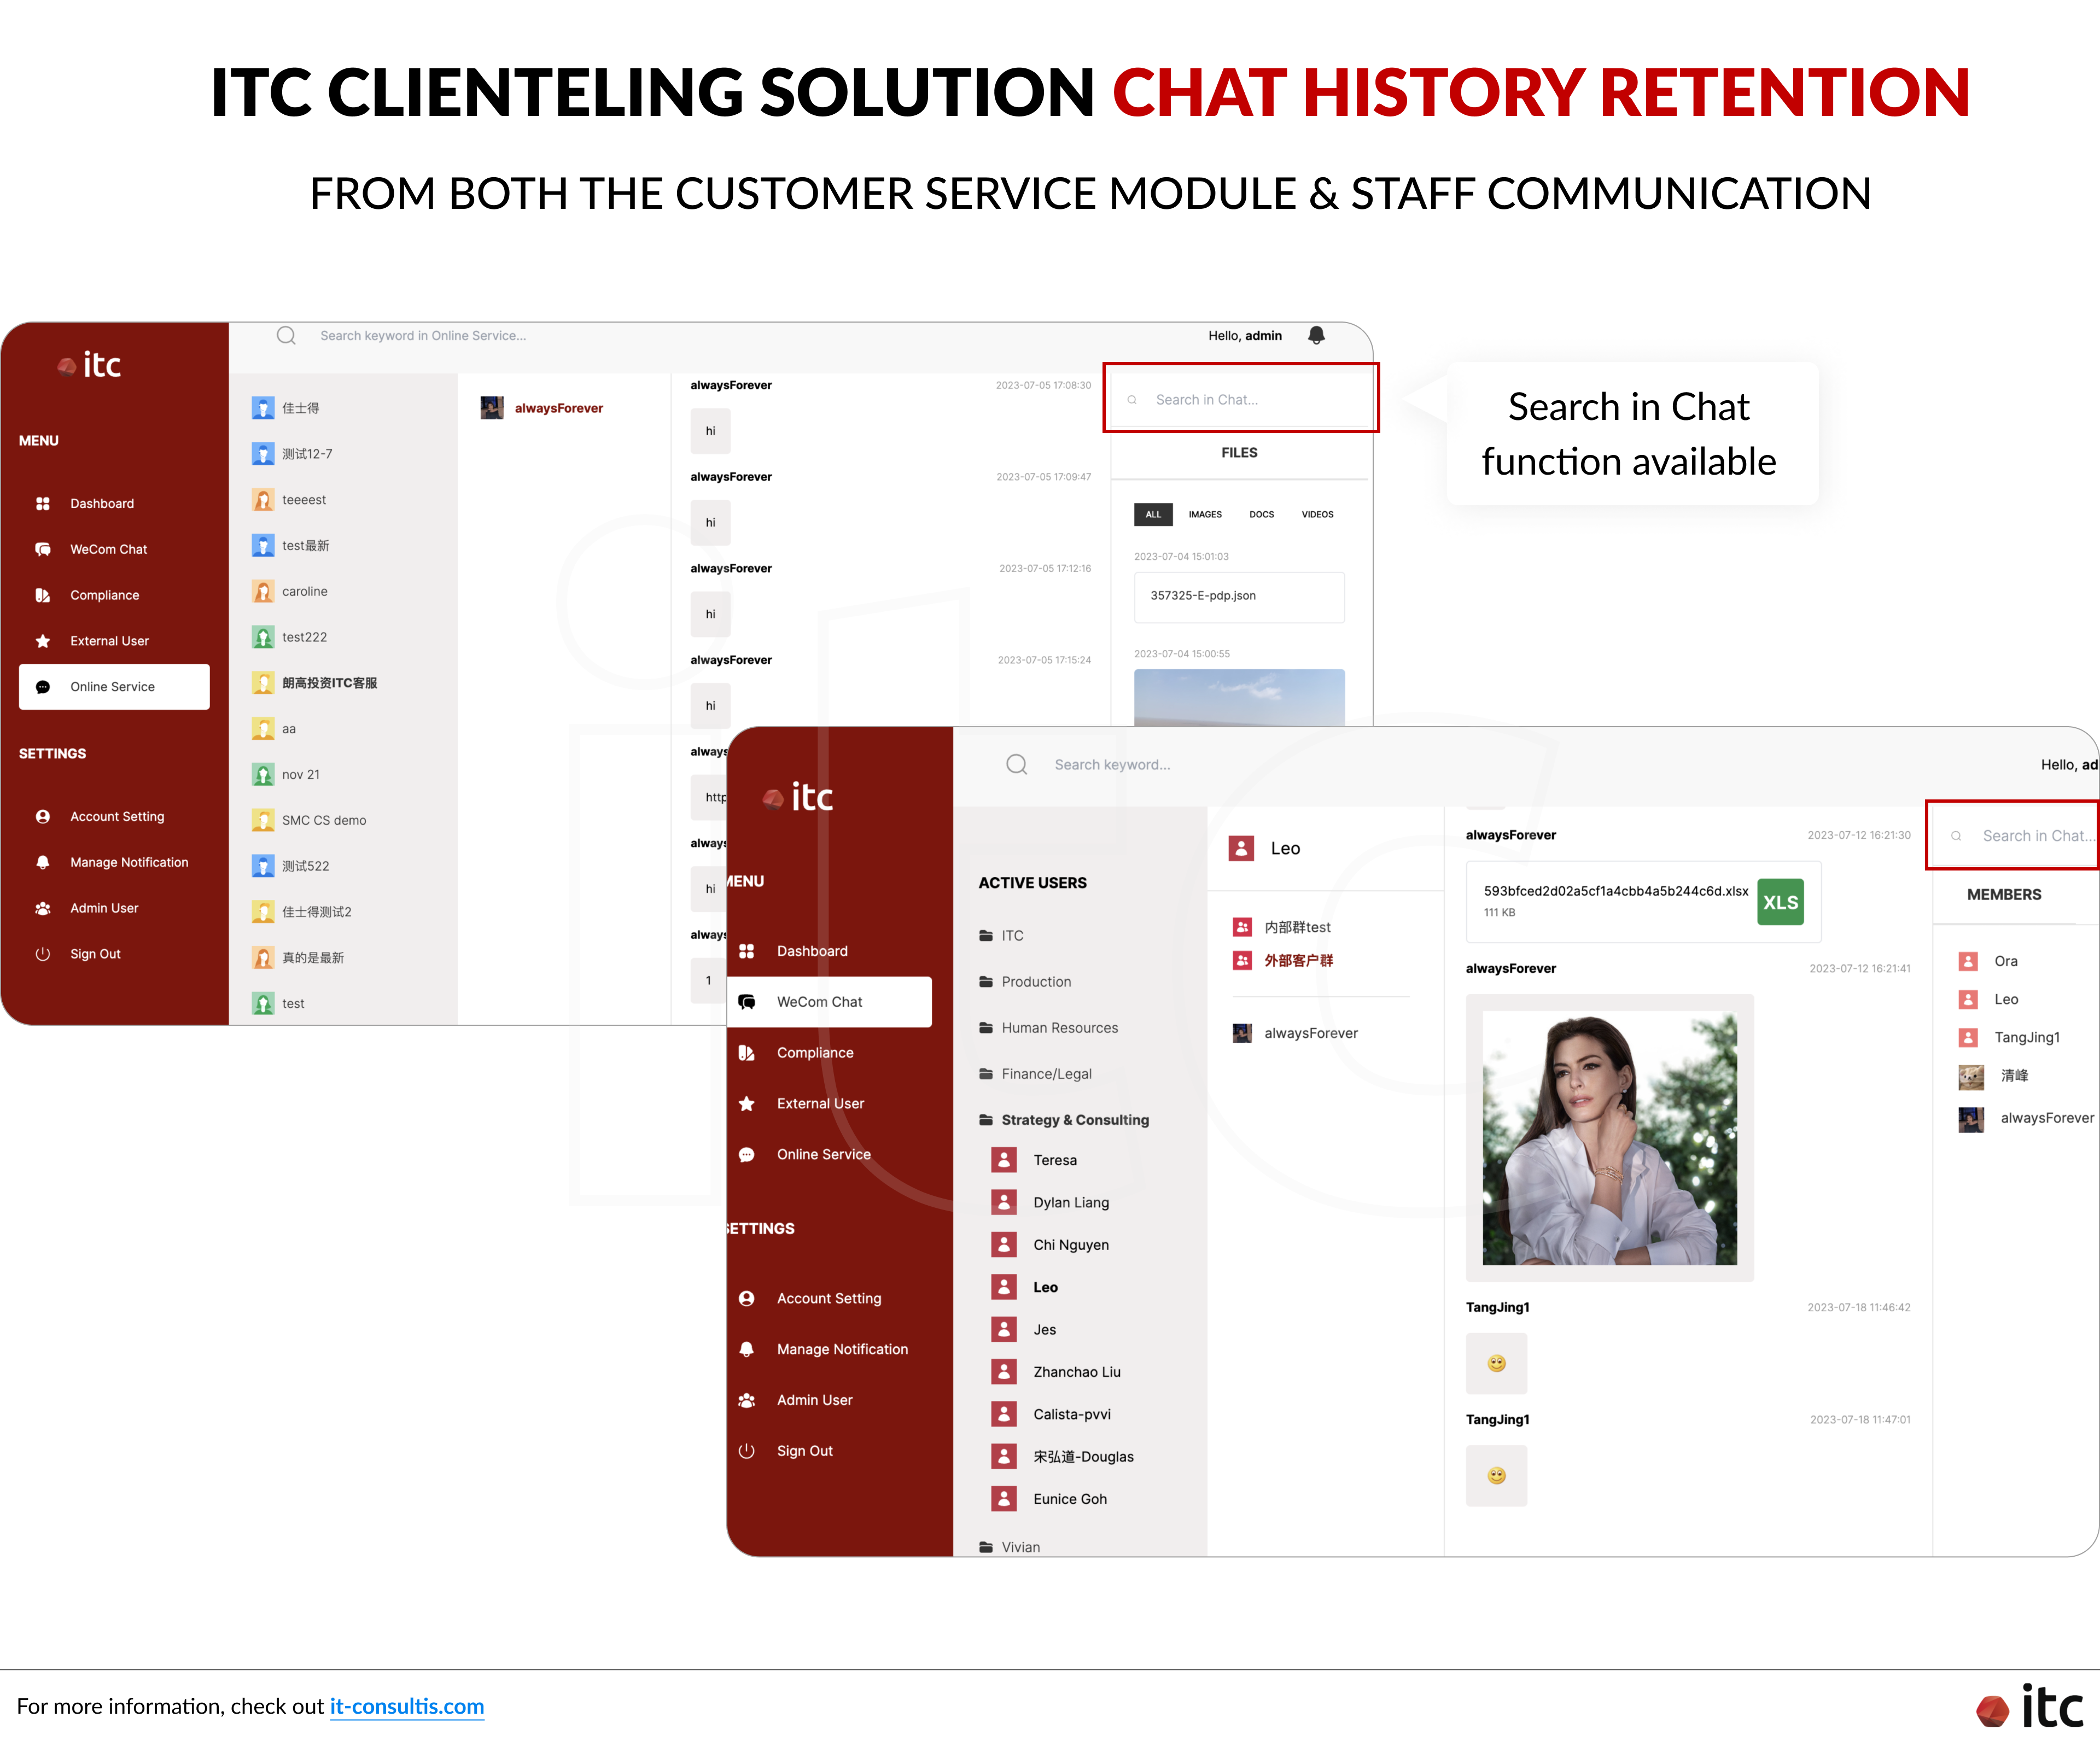 ITC Clienteling Solution enables chat history retention from both the WeCom customer service module and staff communication